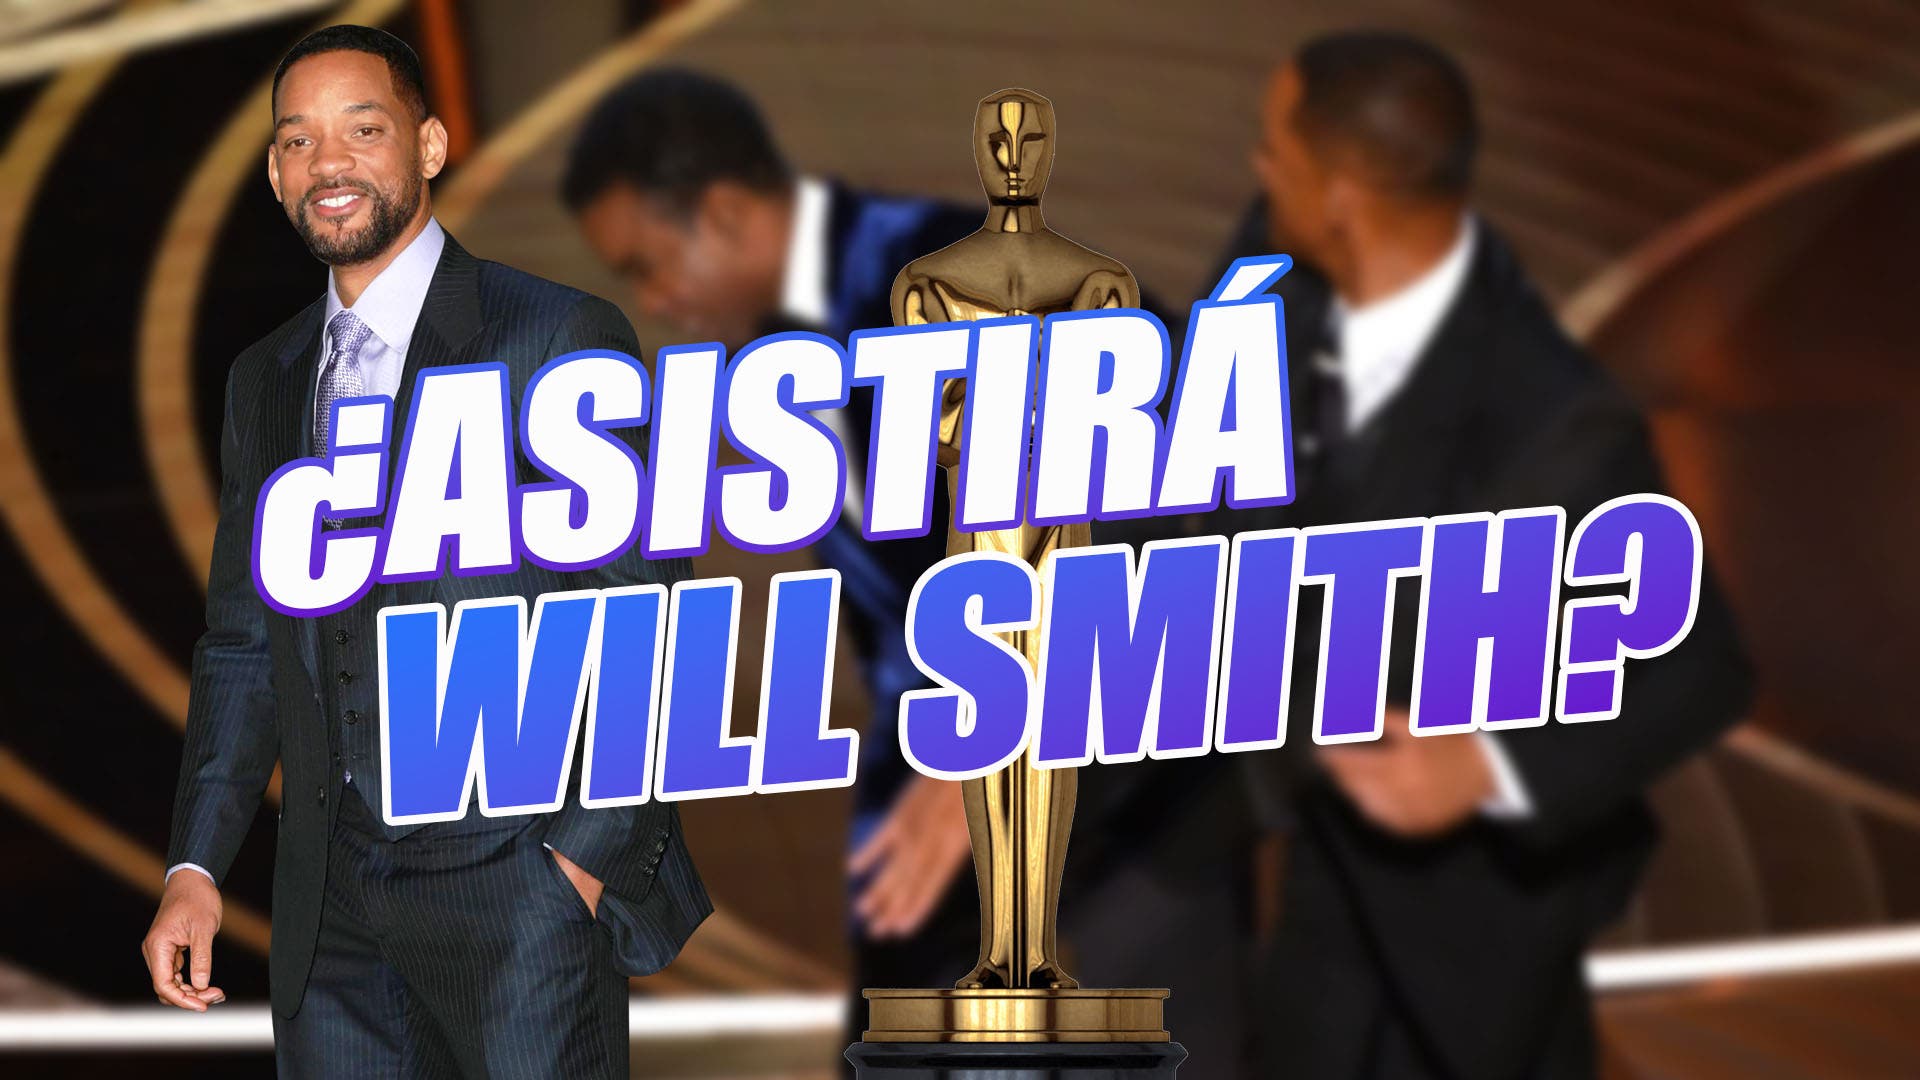 Will Smith attend the 2023 Oscars after his 2022 controversy?